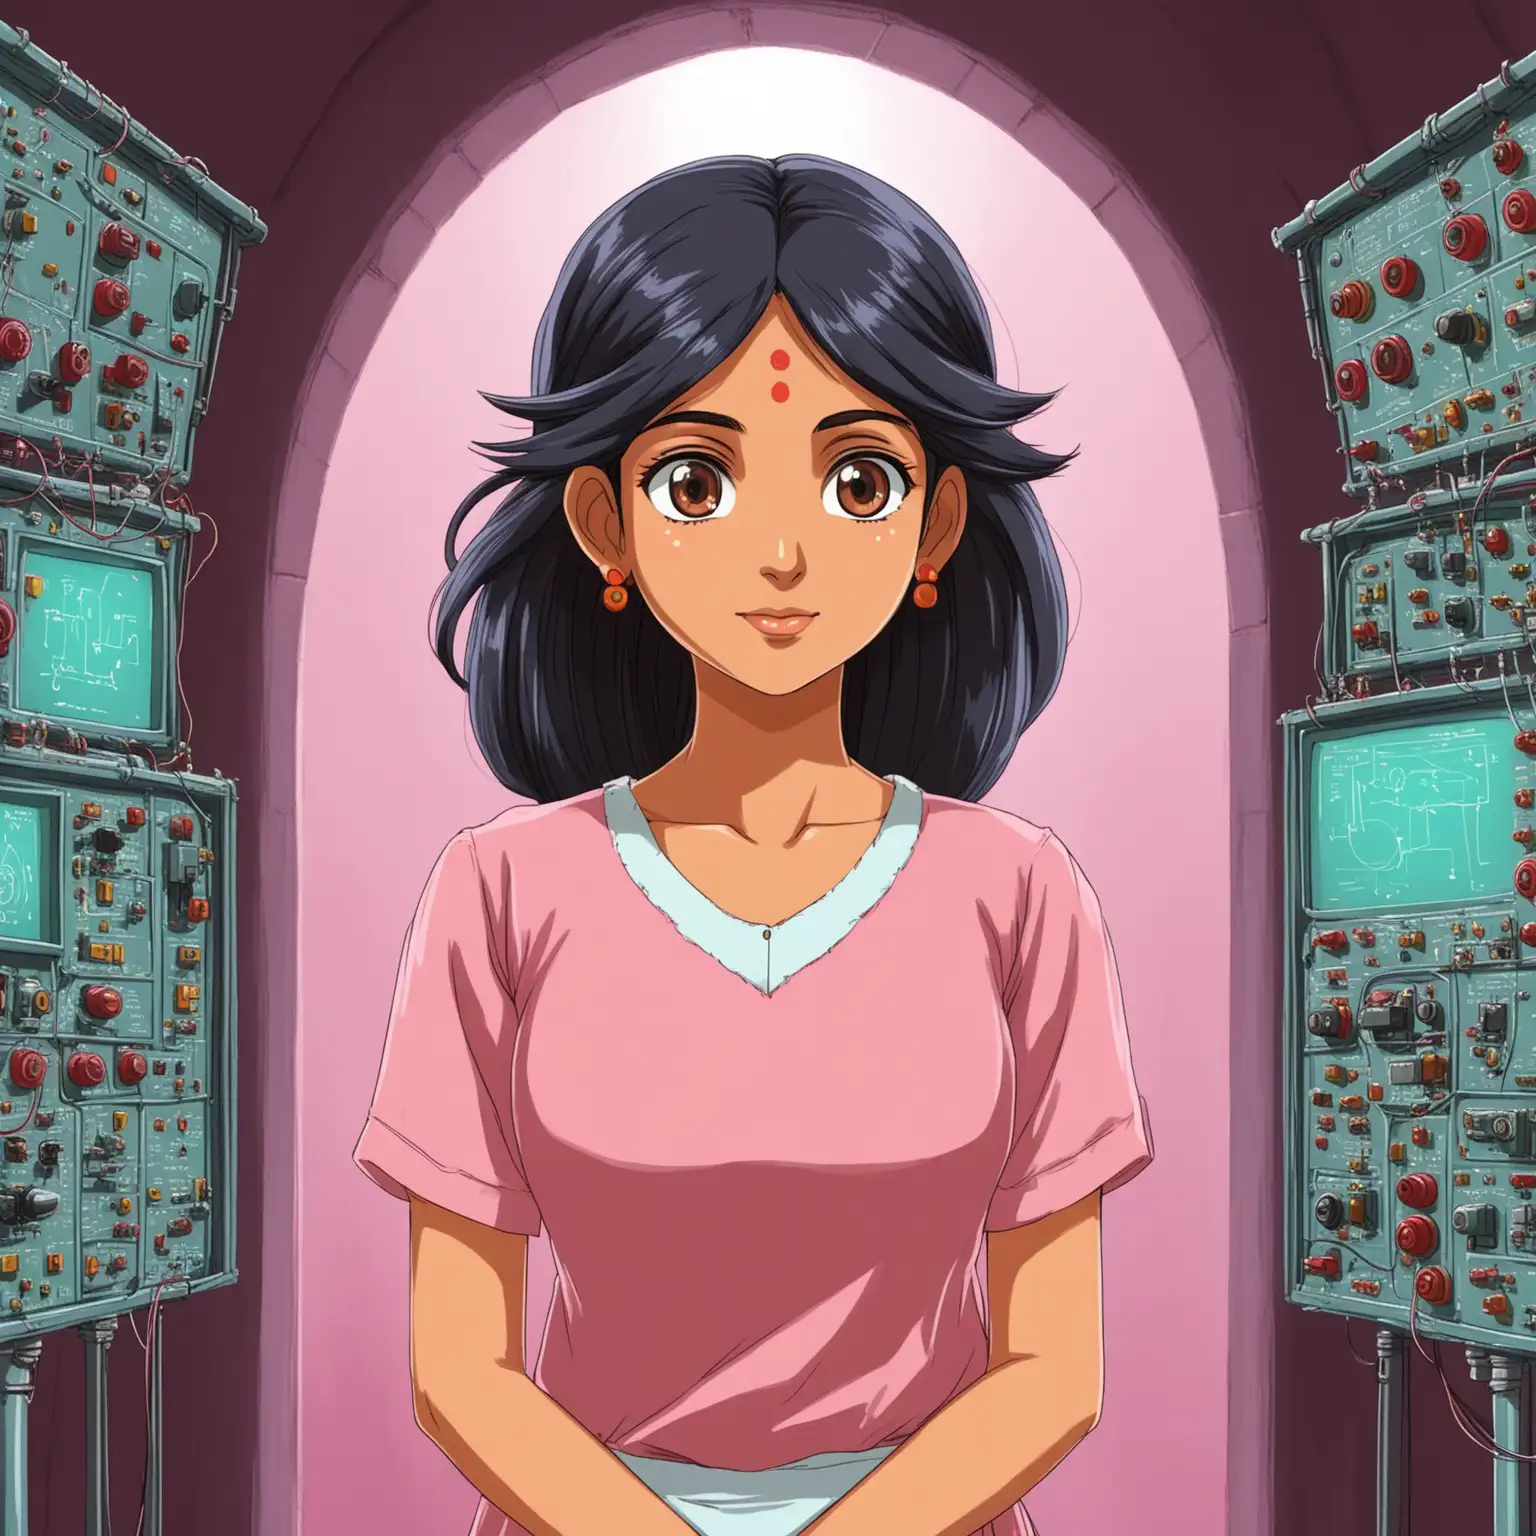 A beautiful pretty Indian Woman. She is a electrical engineer. Make it in the style of Ghibli anime. Make it pink themed